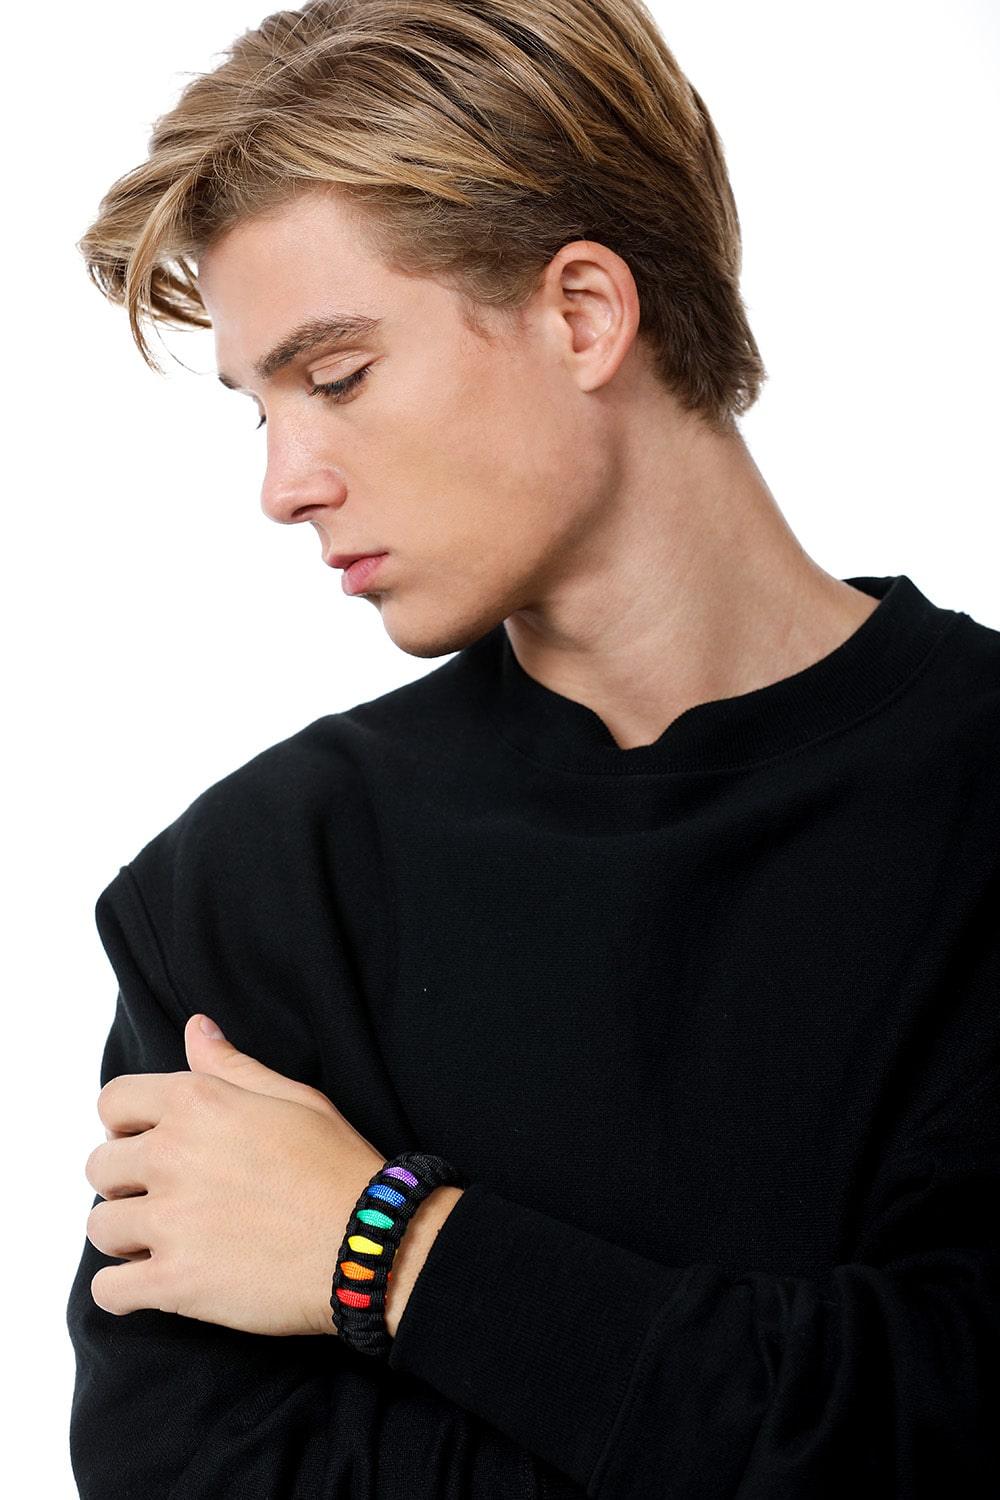 Stylish model elegantly wearing the TOMSCOUT LGBTQ+ Pride Paracord Bracelet with a striking rainbow design, a sustainable and fashionable accessory for expressing LGBTQ+ pride and solidarity.